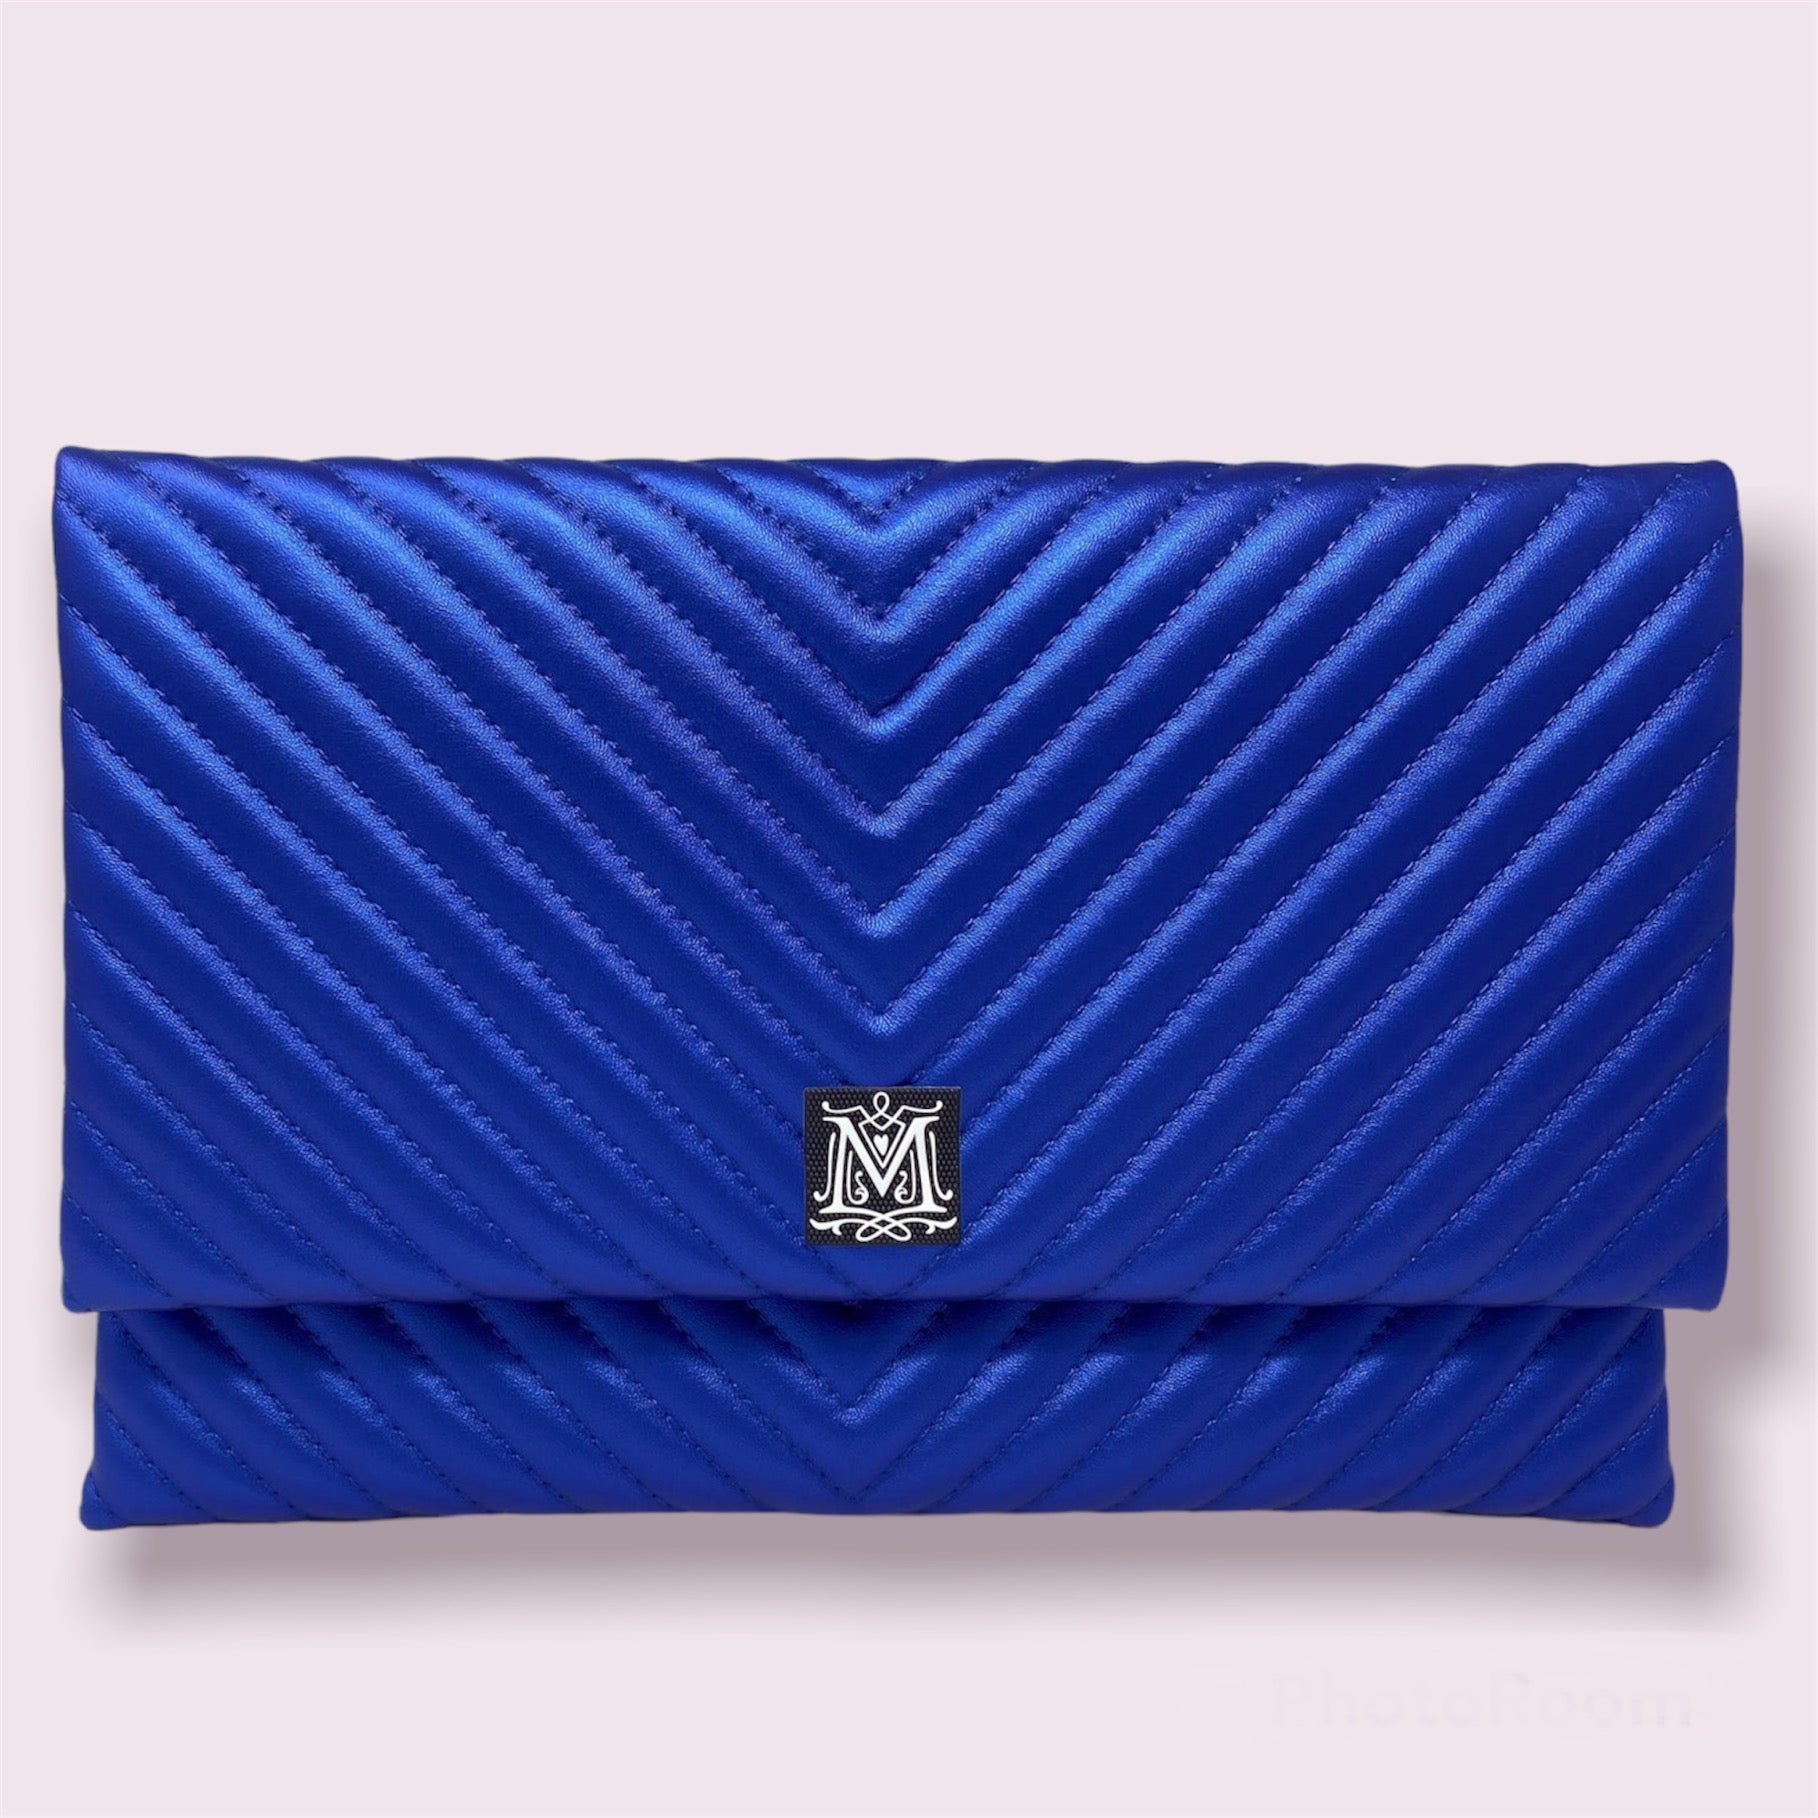 Convertible Clutch - Chevron Quilted Blue